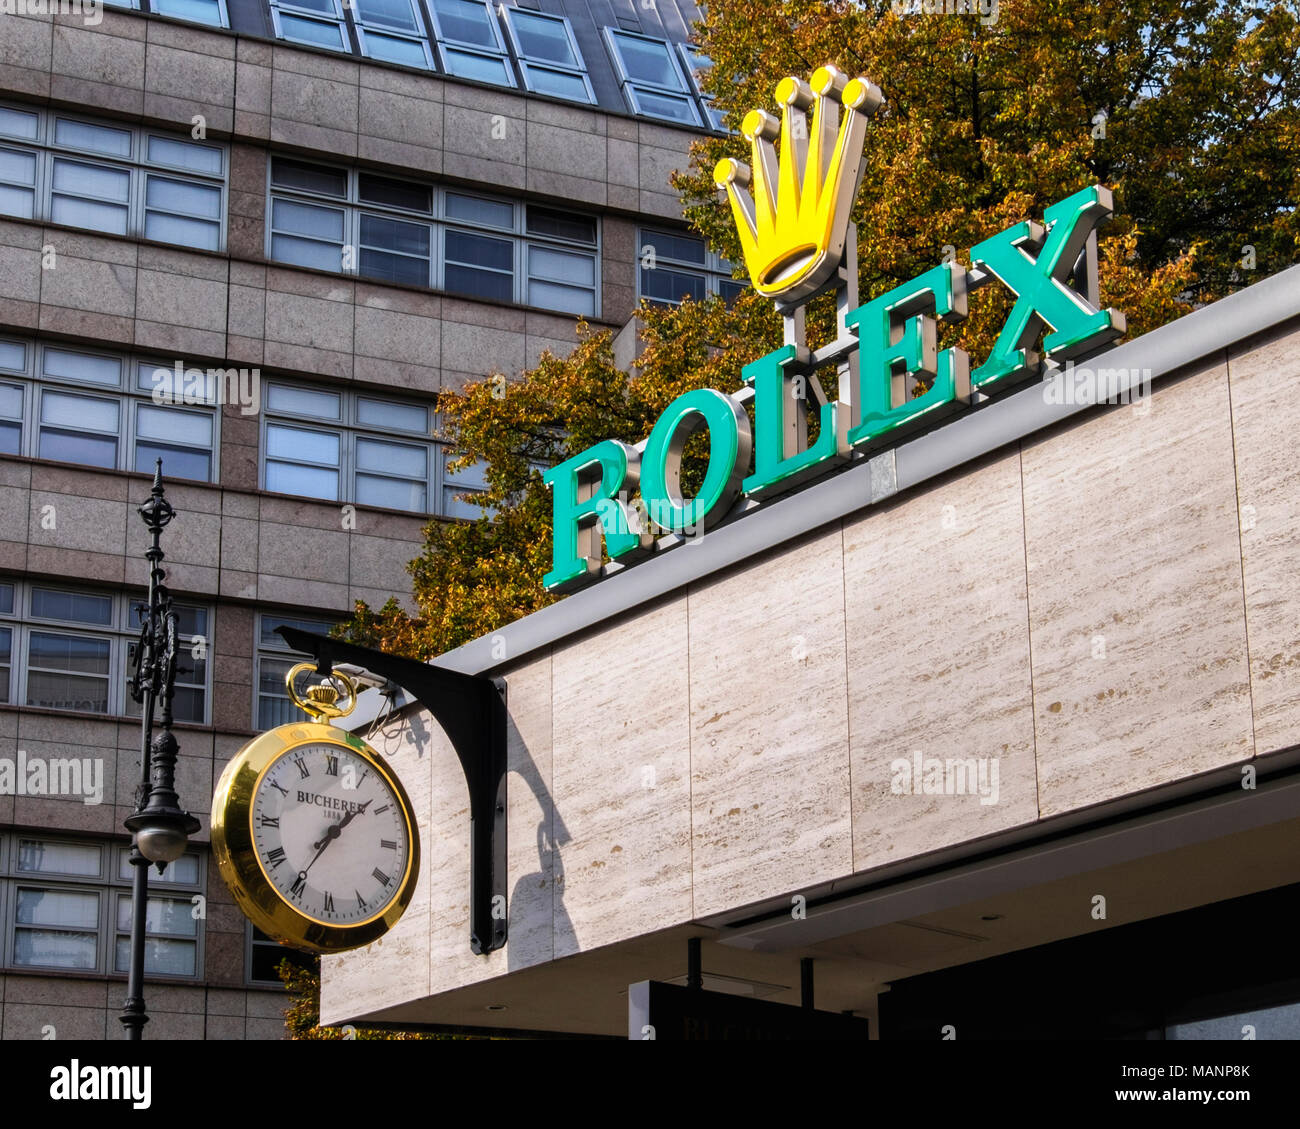 Rolex Berlin High Resolution Stock Photography and Images - Alamy